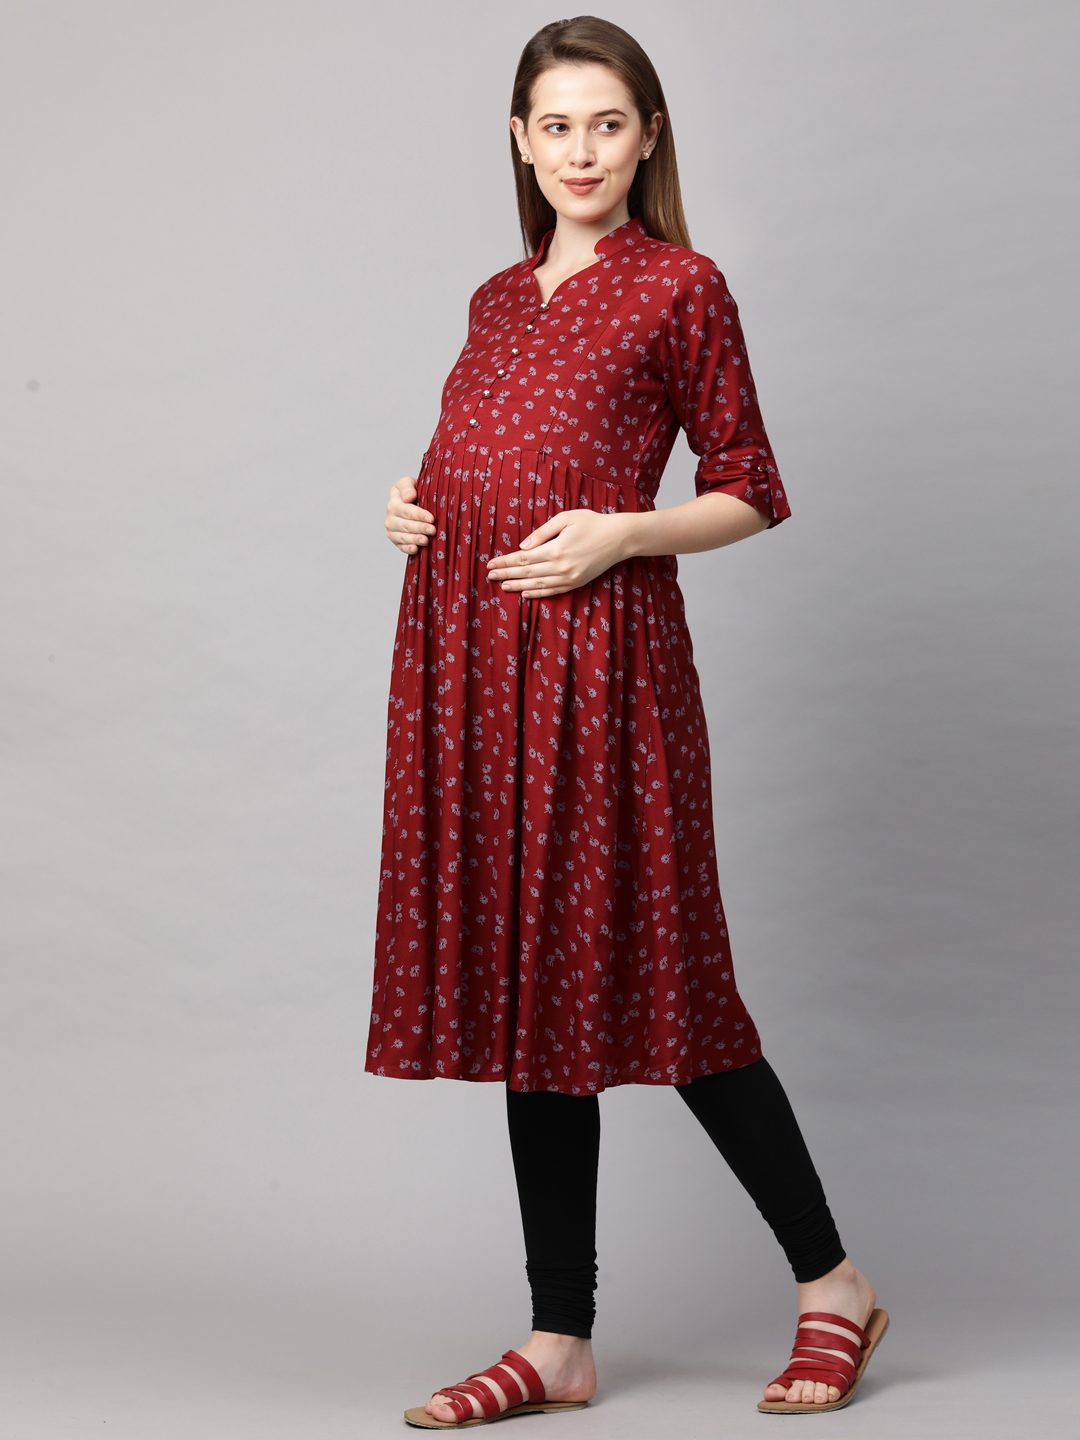 Buy Maternity Clothes, Pregnancy Wear Online India | Maternity dresses  summer, Stylish maternity outfits, Indian maternity wear